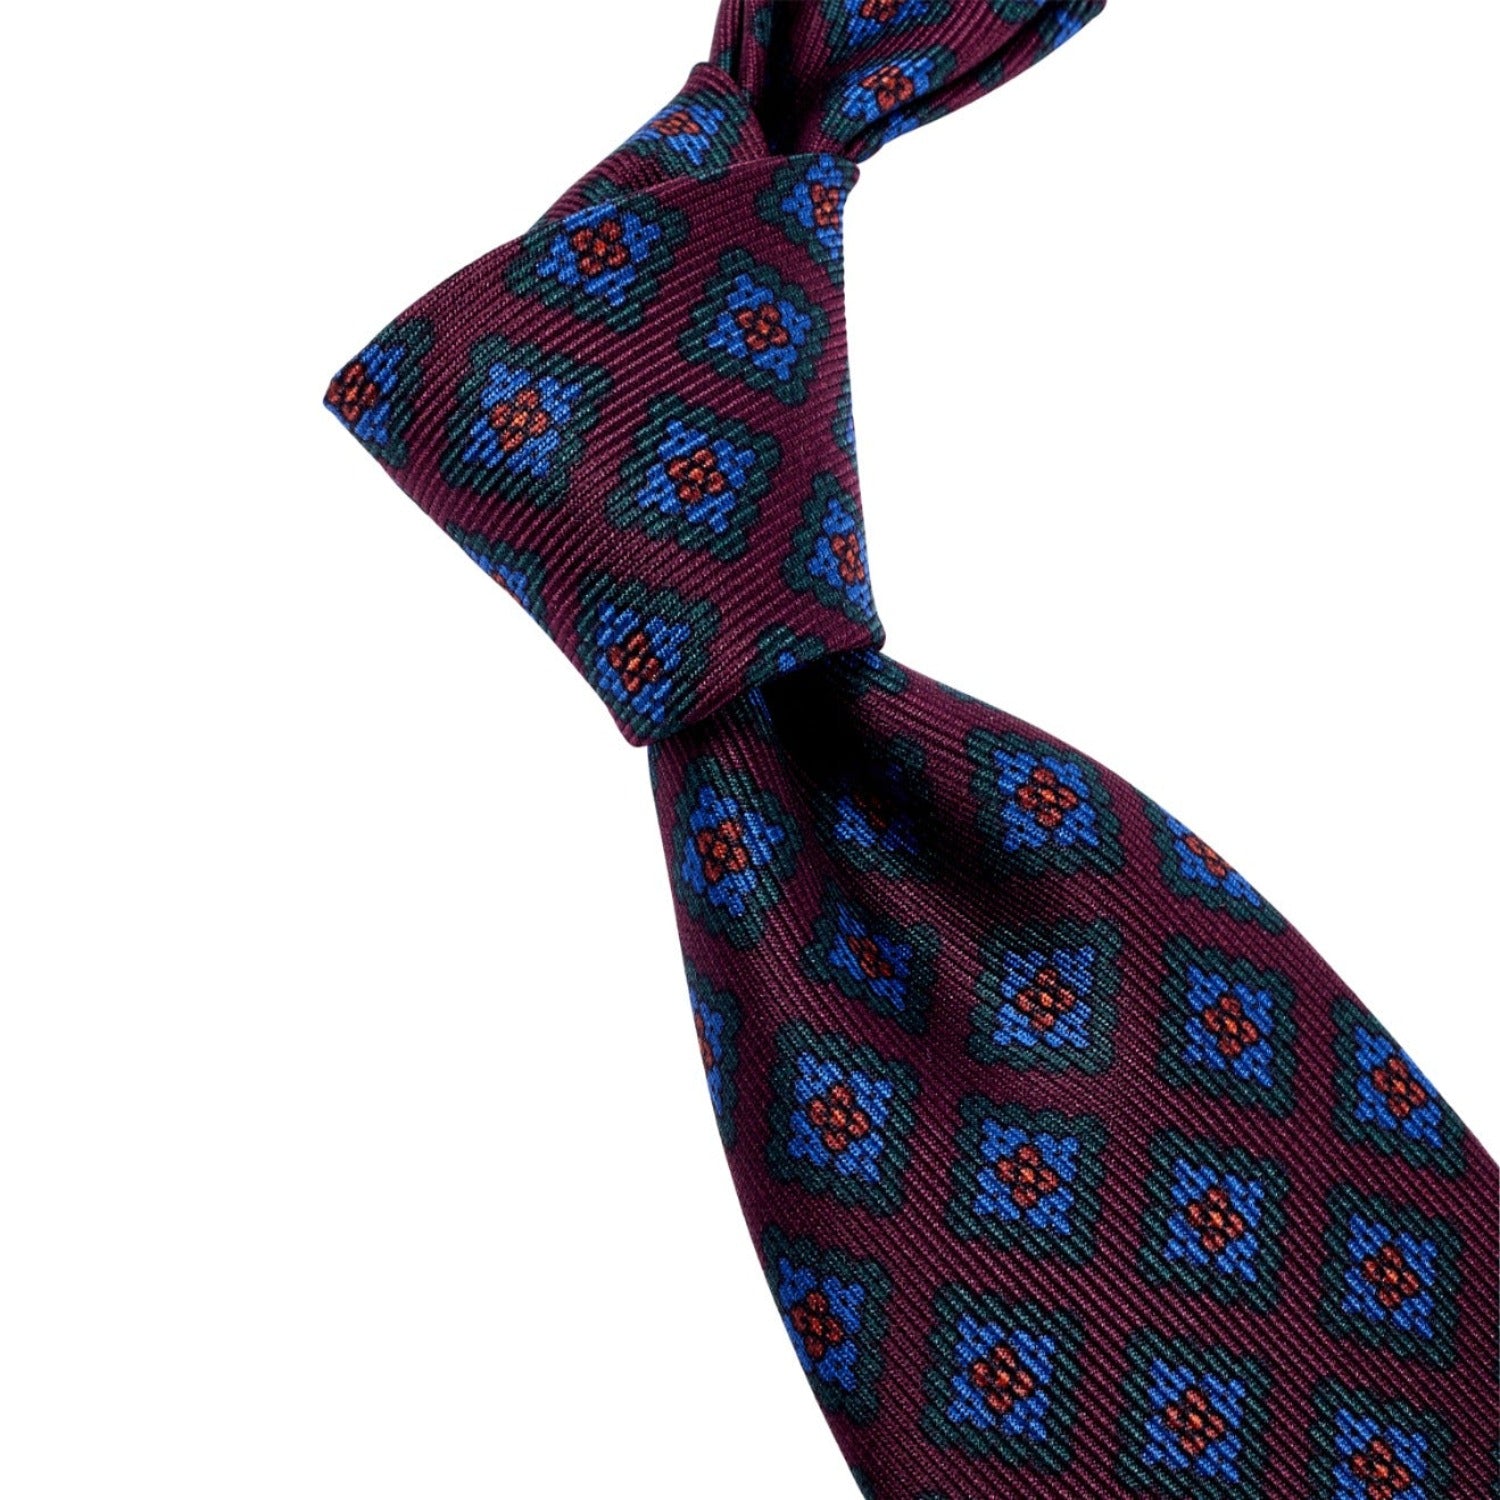 A high-quality Sovereign Grade Burgundy Diamond Ancient Madder Silk Tie with blue and red designs, crafted by hand from KirbyAllison.com.